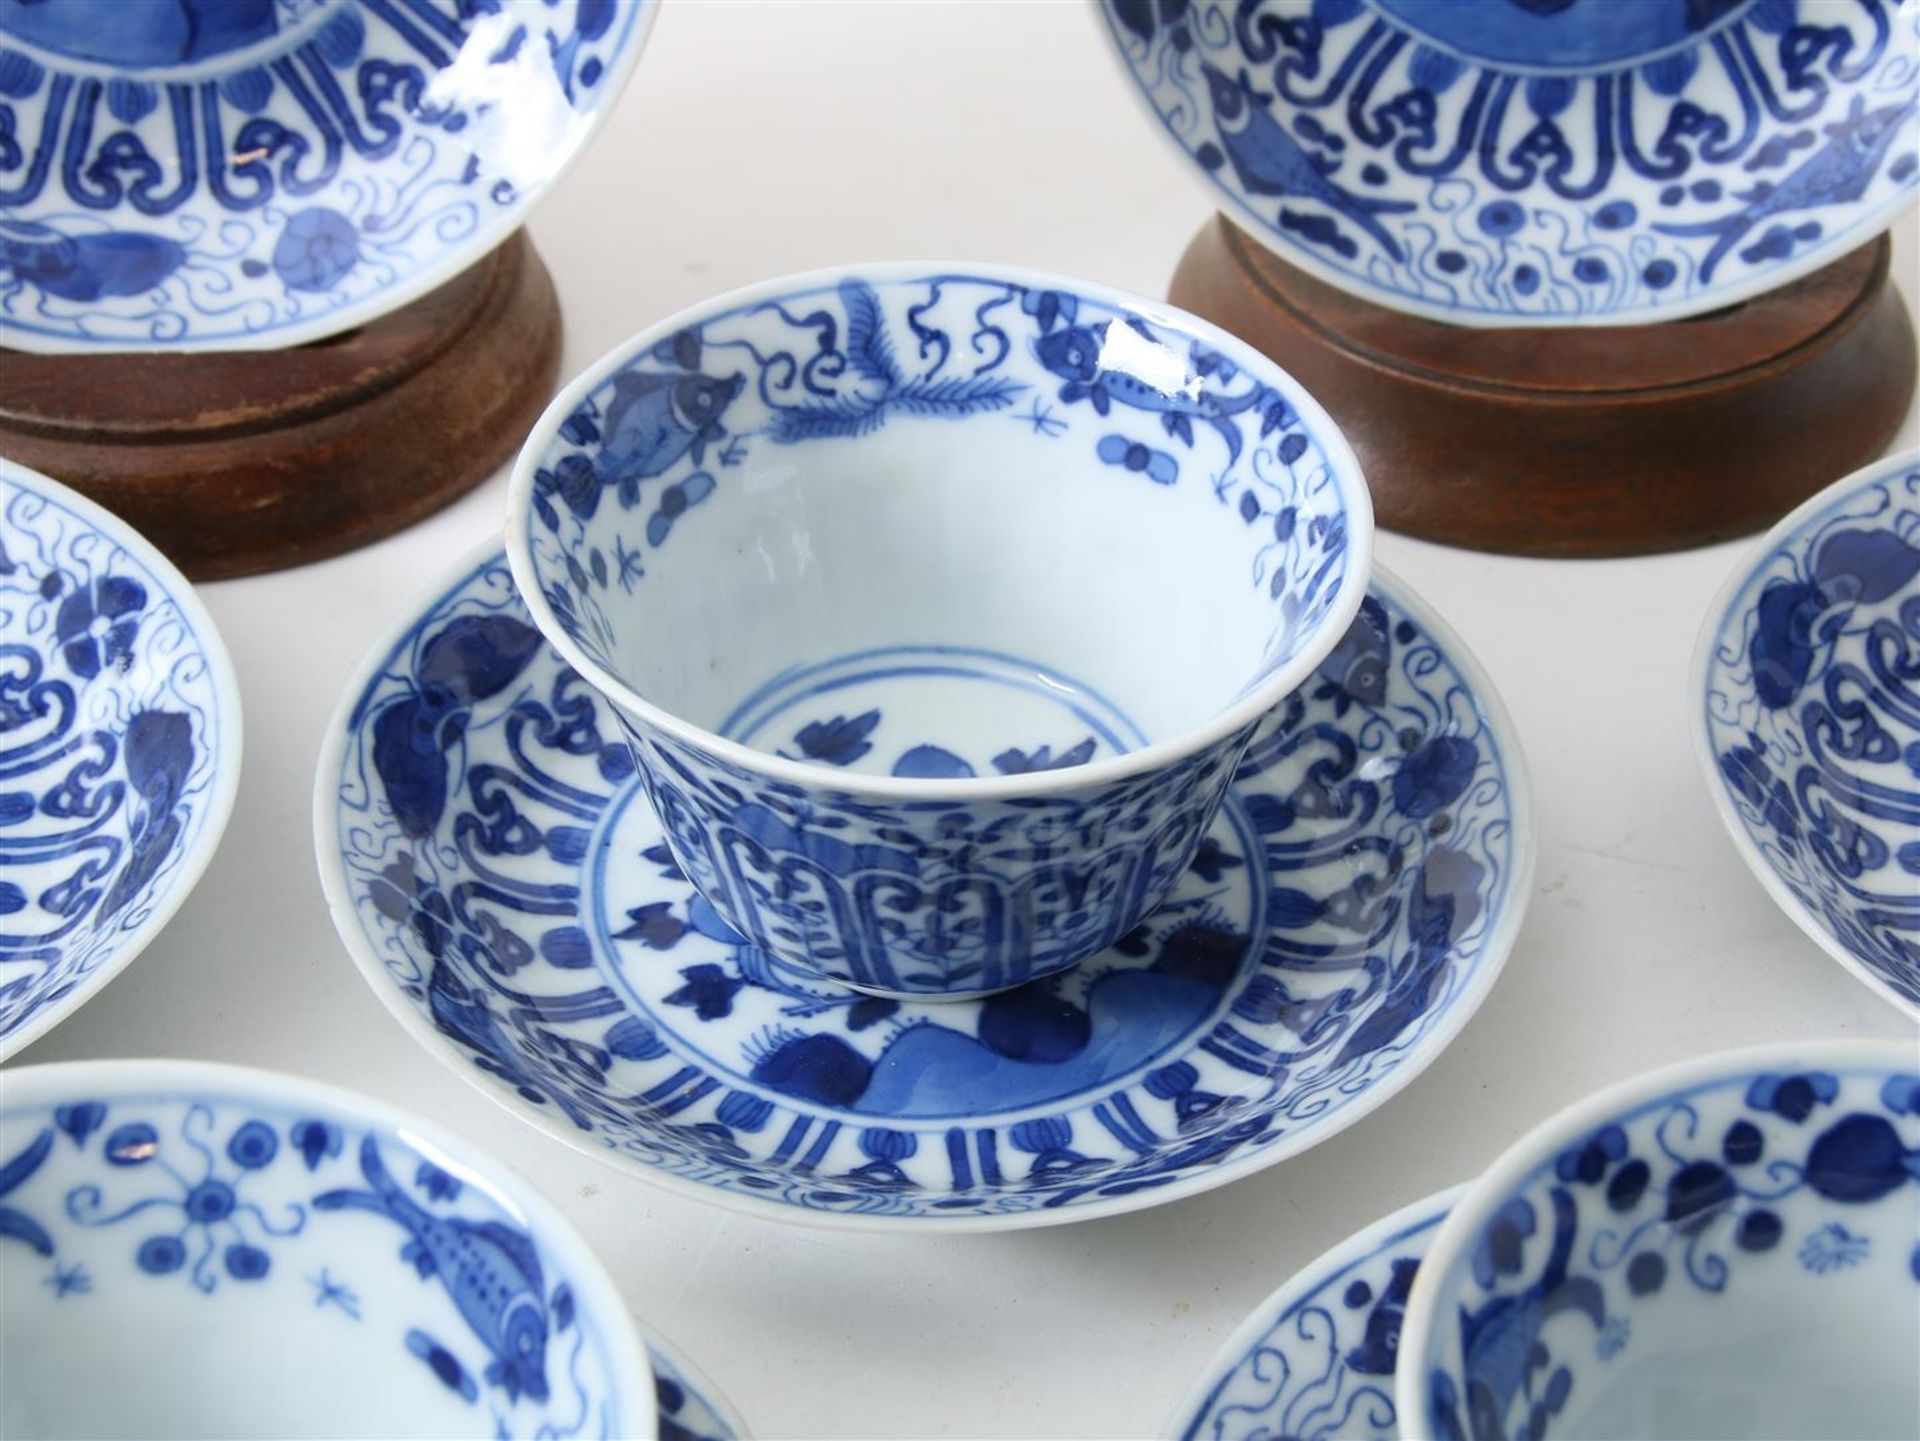 Lot of 12 porcelain cups and 11 saucers decorated in blue with perch and butterfly decor, China - Image 8 of 19